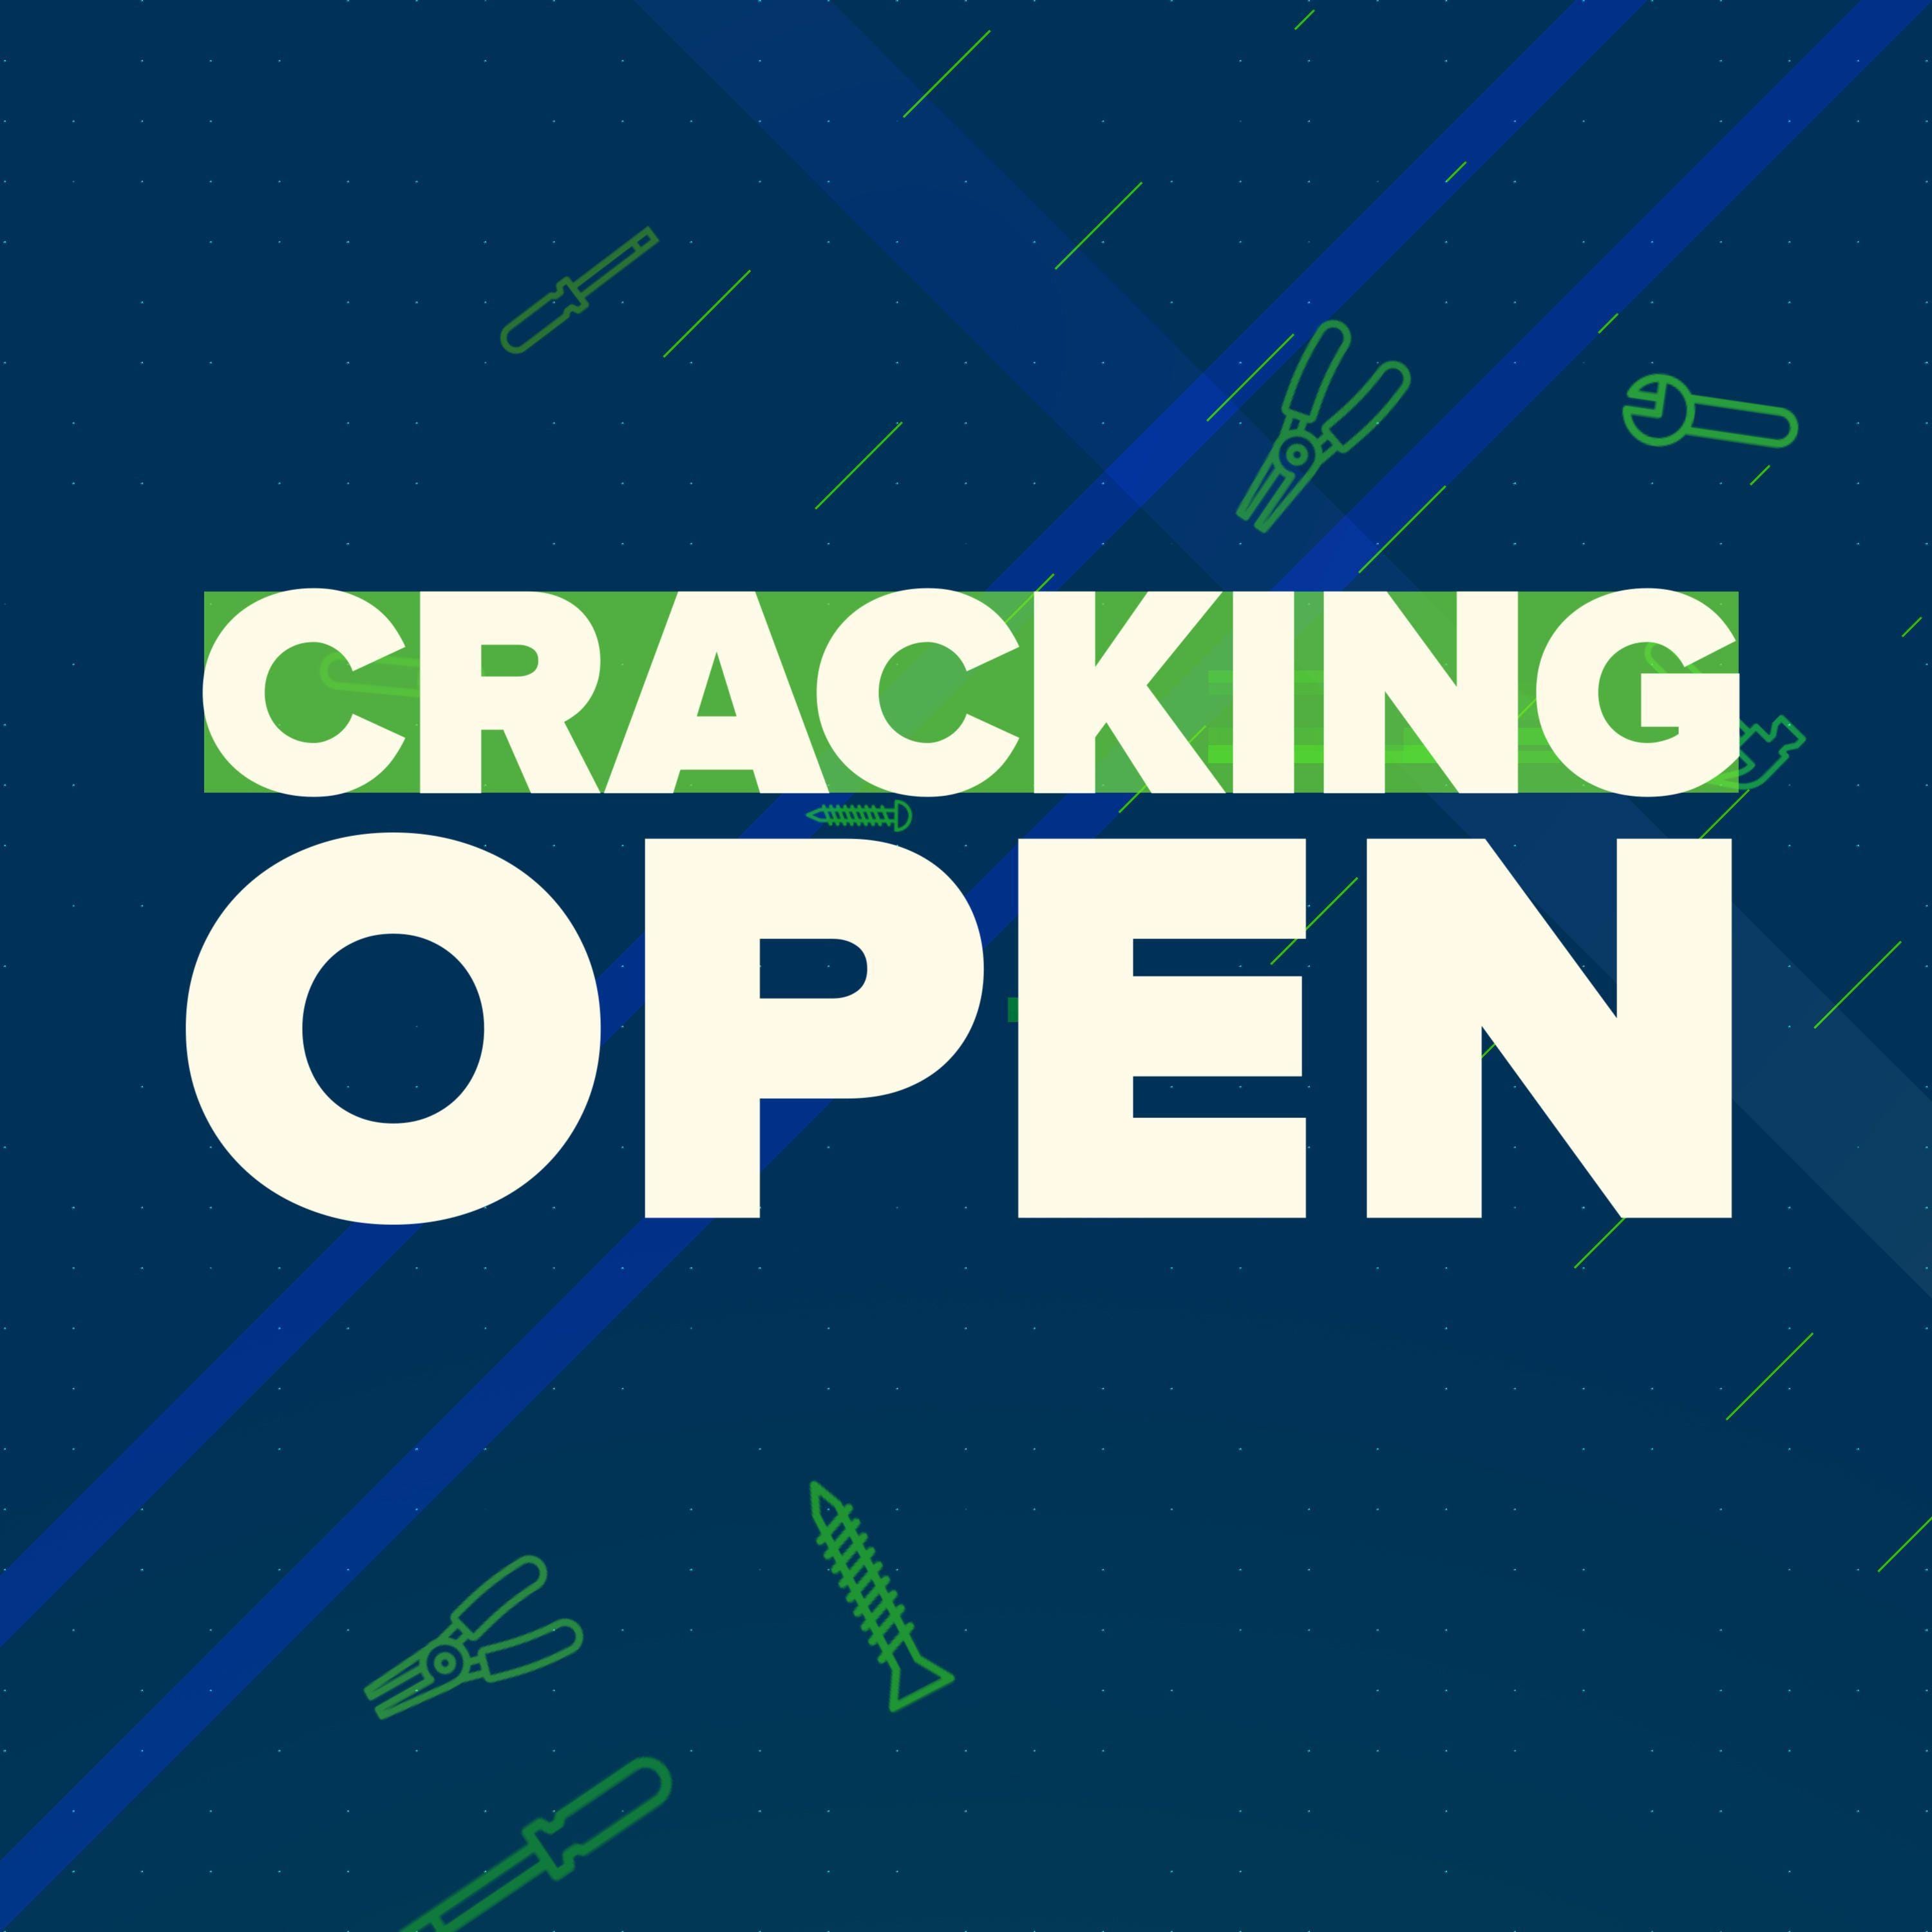 Cracking Open (HQ)